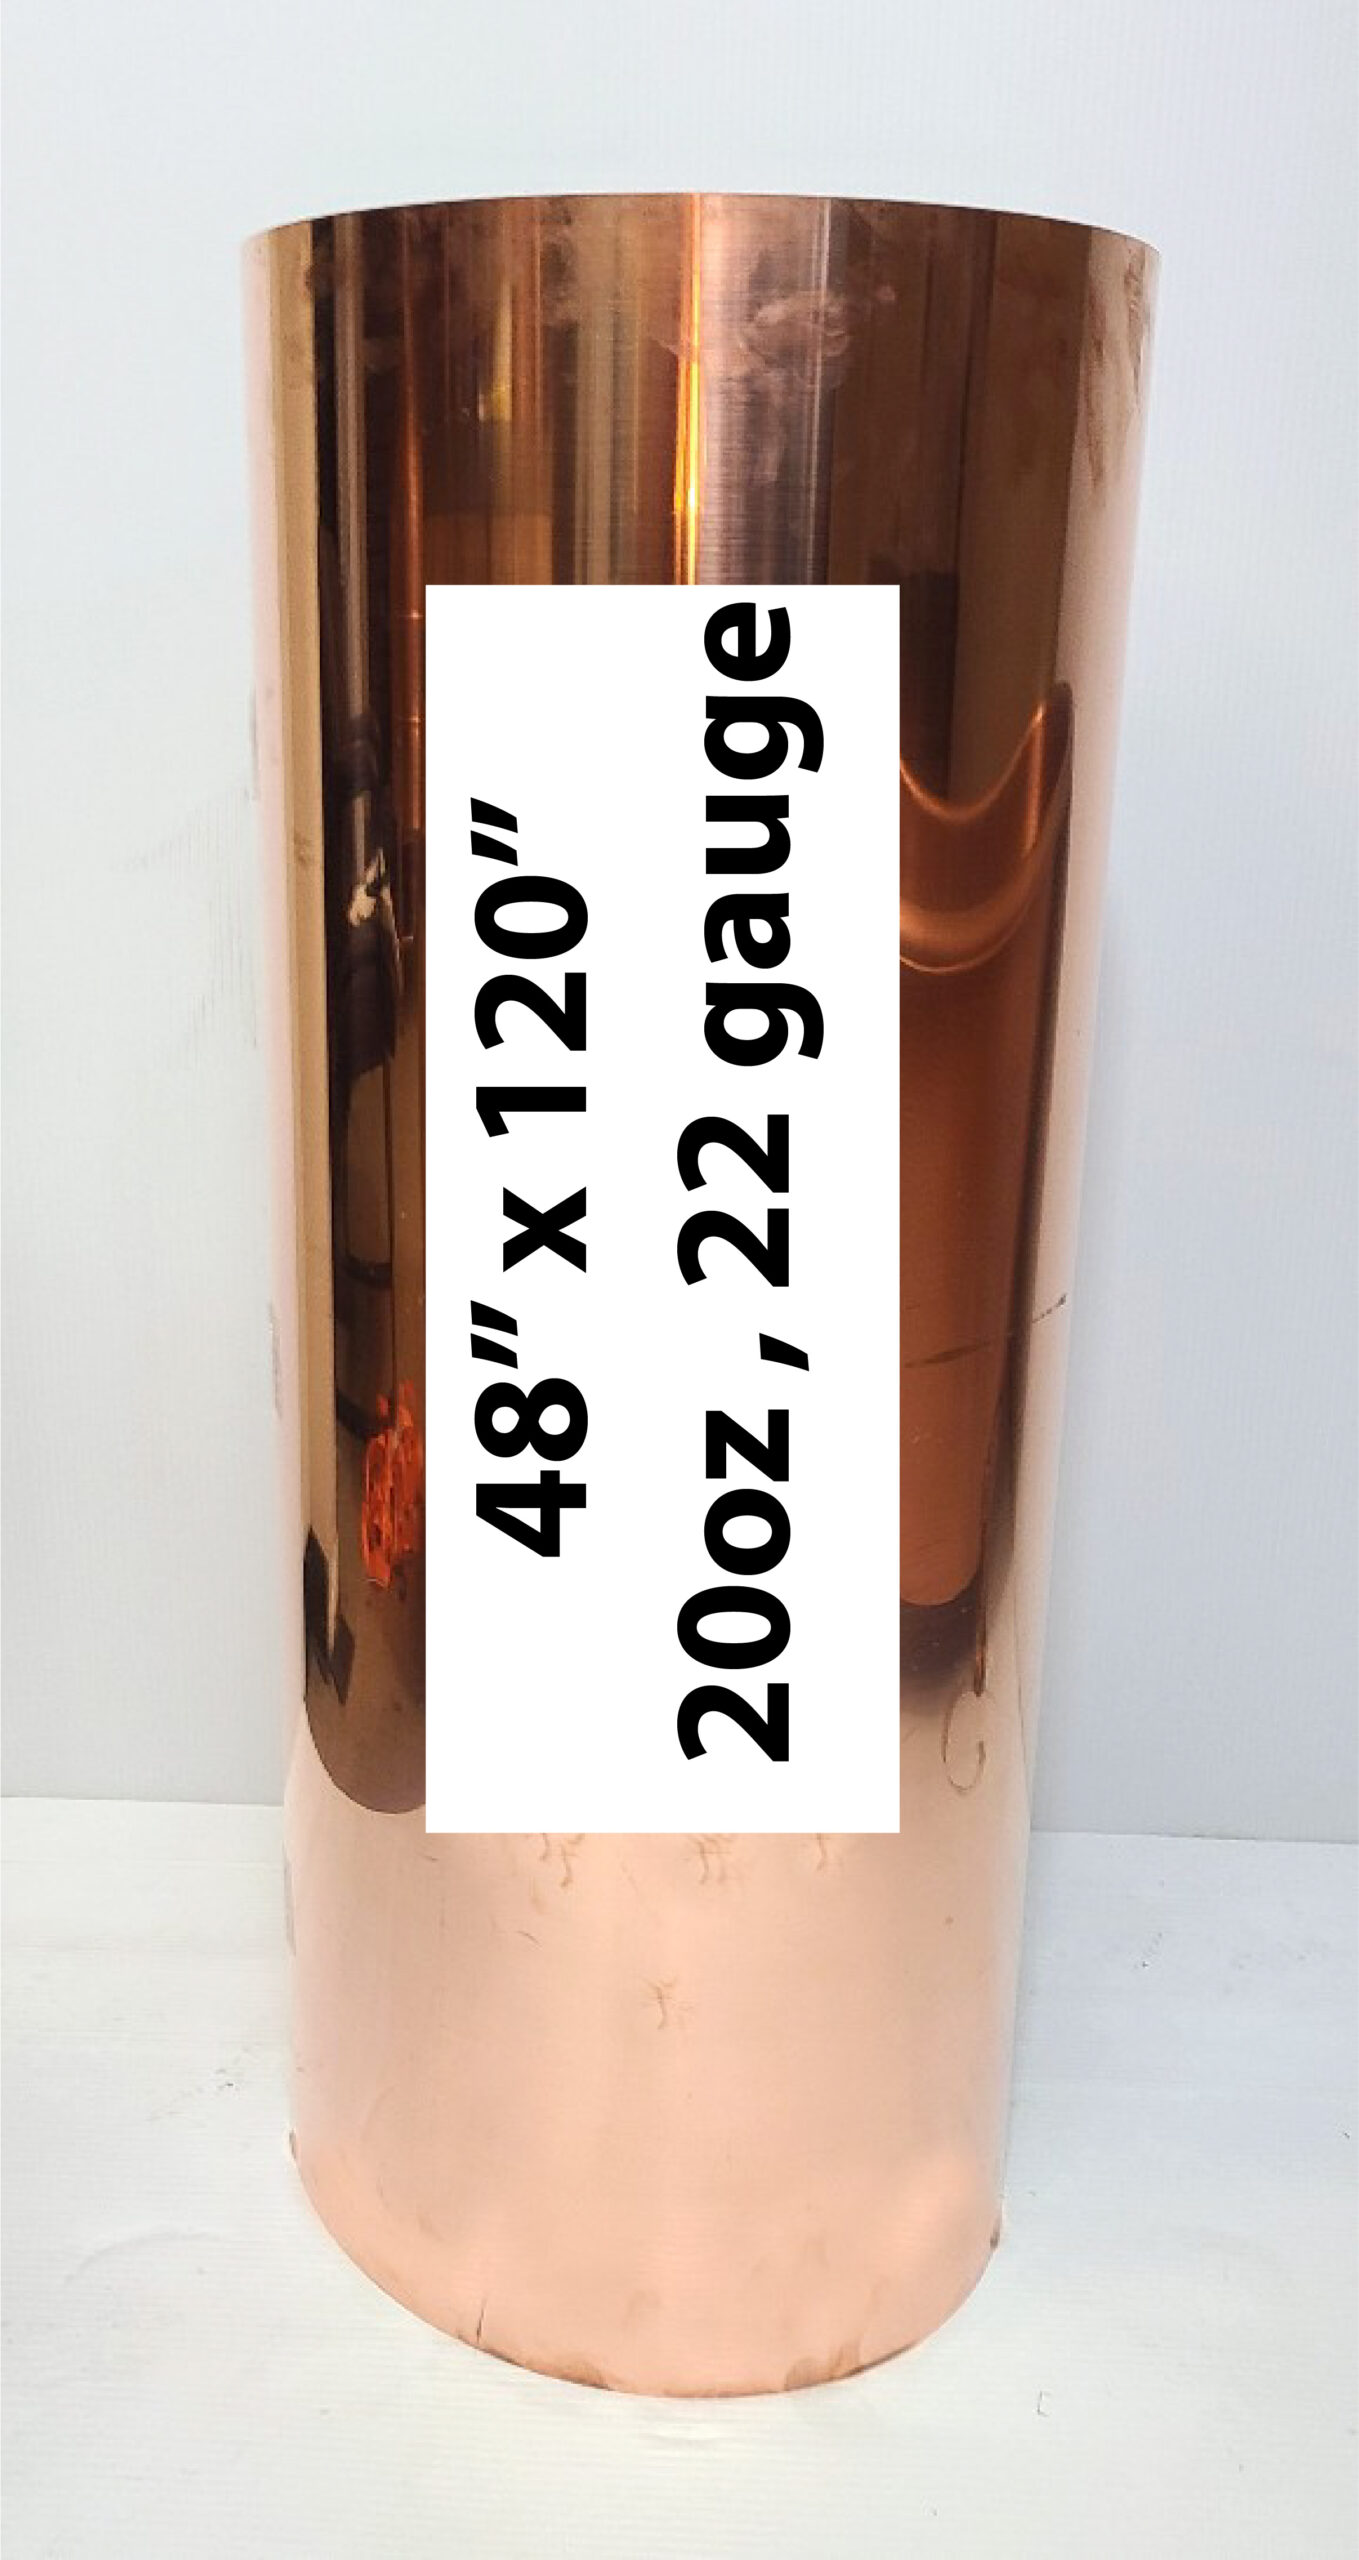 Copper Sheets 48 x 120 20oz 22-Gauge Mill Finish - Copper Moonshine and  Essential Oil Stills Copper Sheets 48 x 120 20oz 22-Gauge Mill Finish